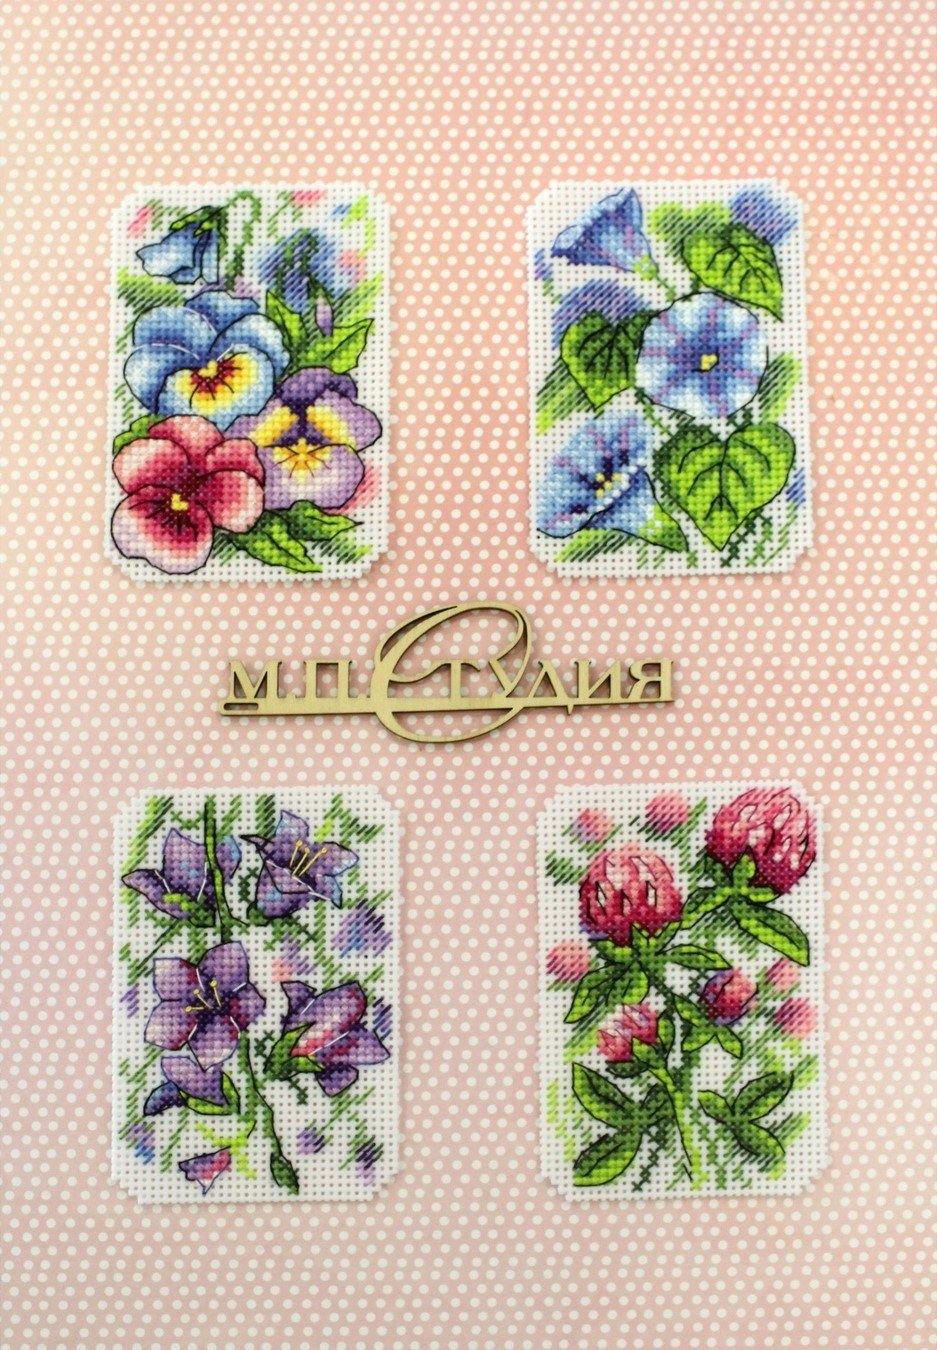 VIGEGU Flowers Cross Stitch Kits for Adults - Stamped Cross